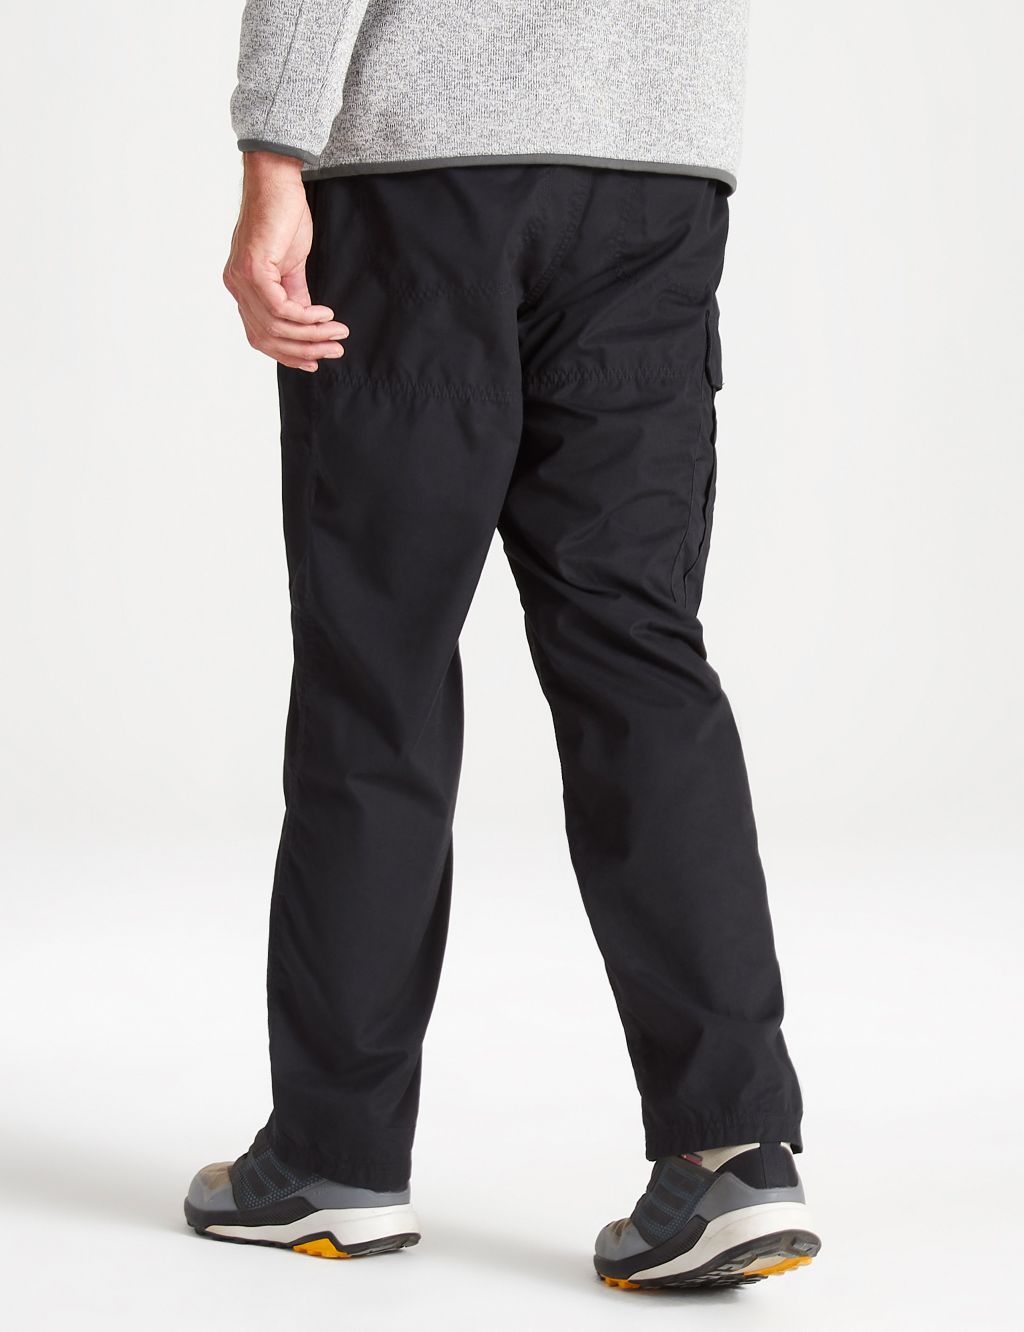 Kiwi Loose Fit Cargo Trousers | Craghoppers | M&S